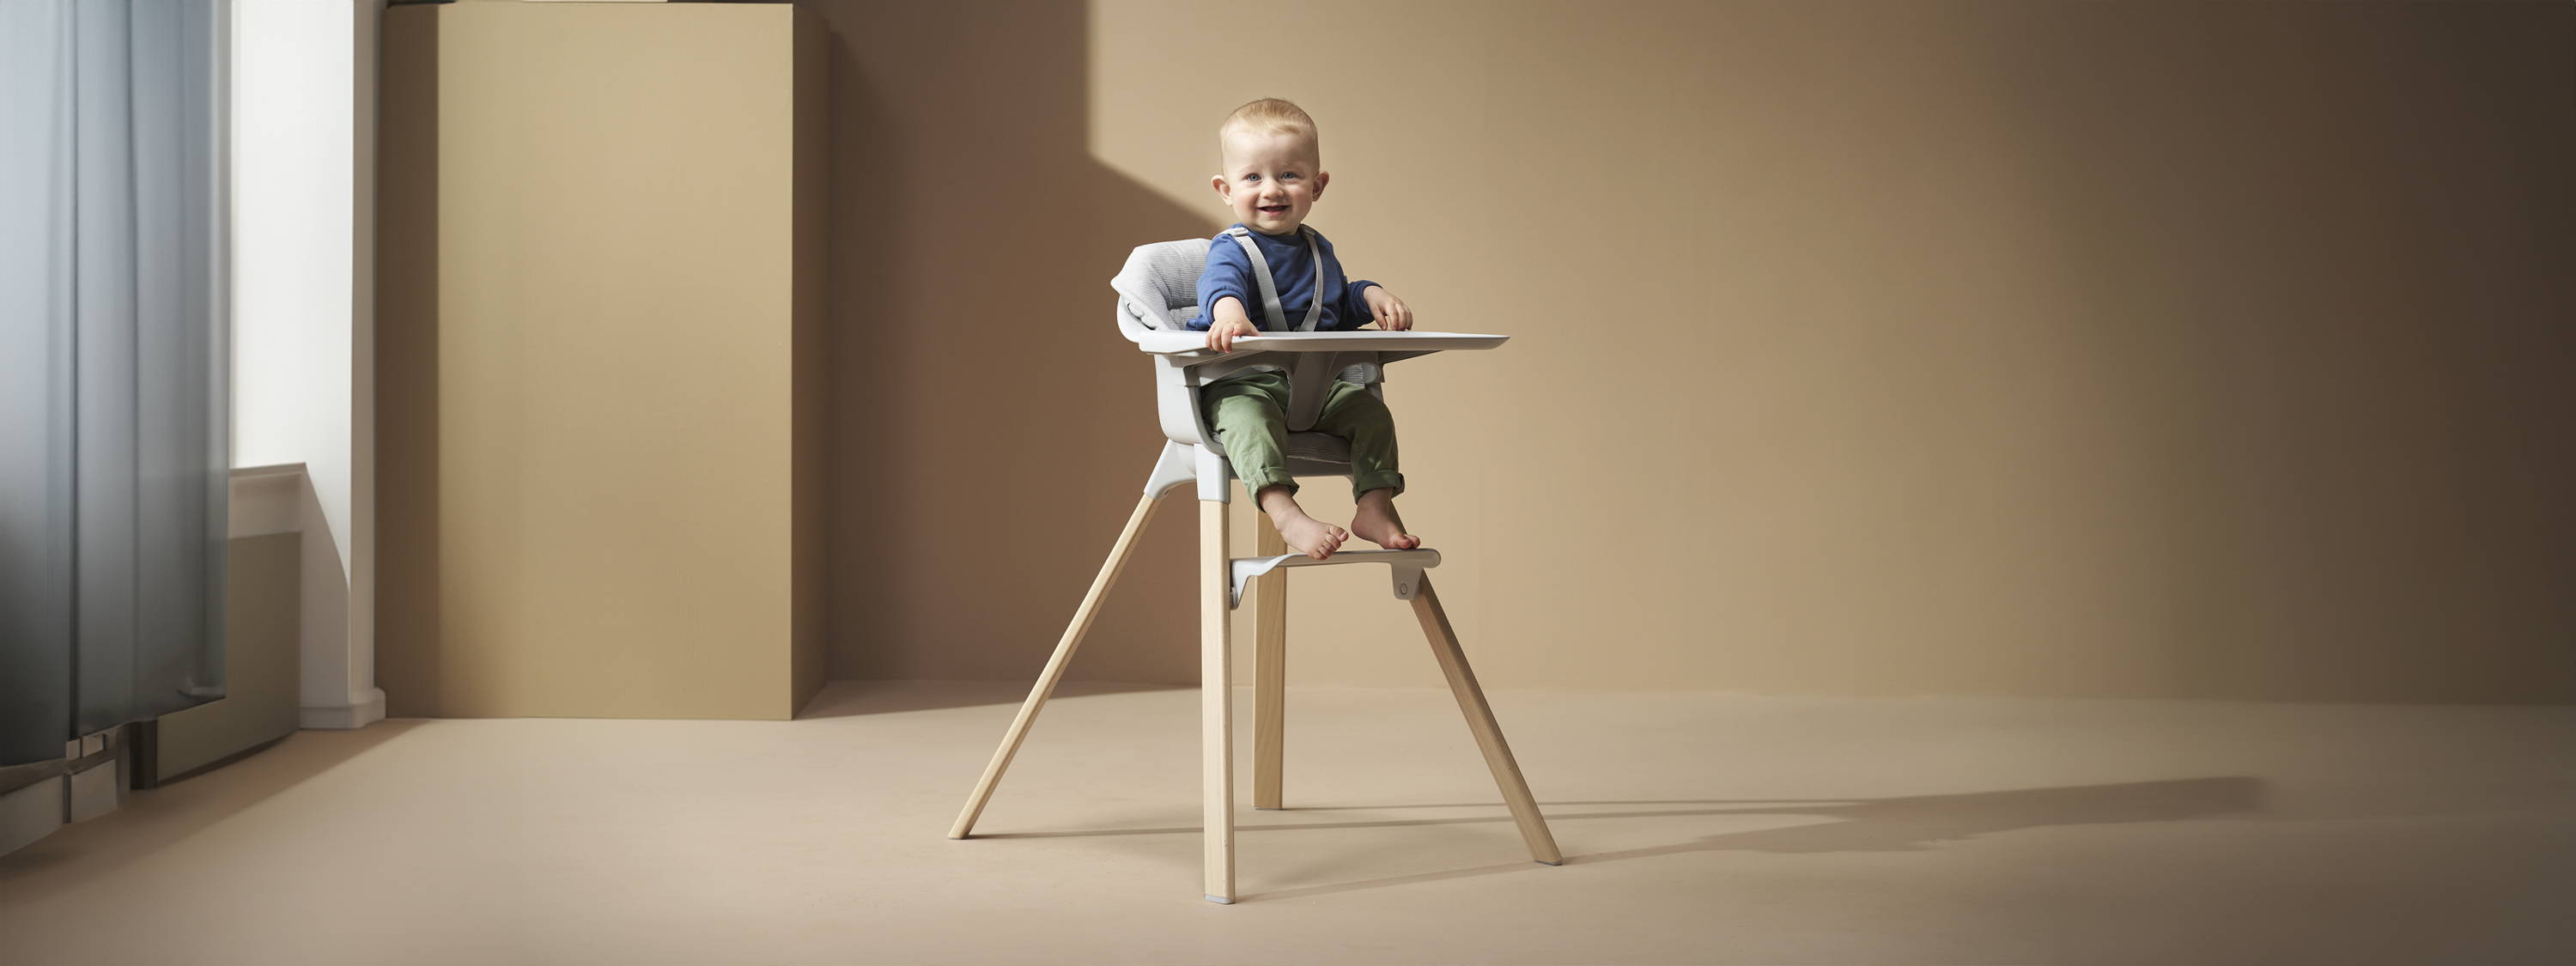 Scandinavian legacy meets family lifestyle with Stokke at Rustan's